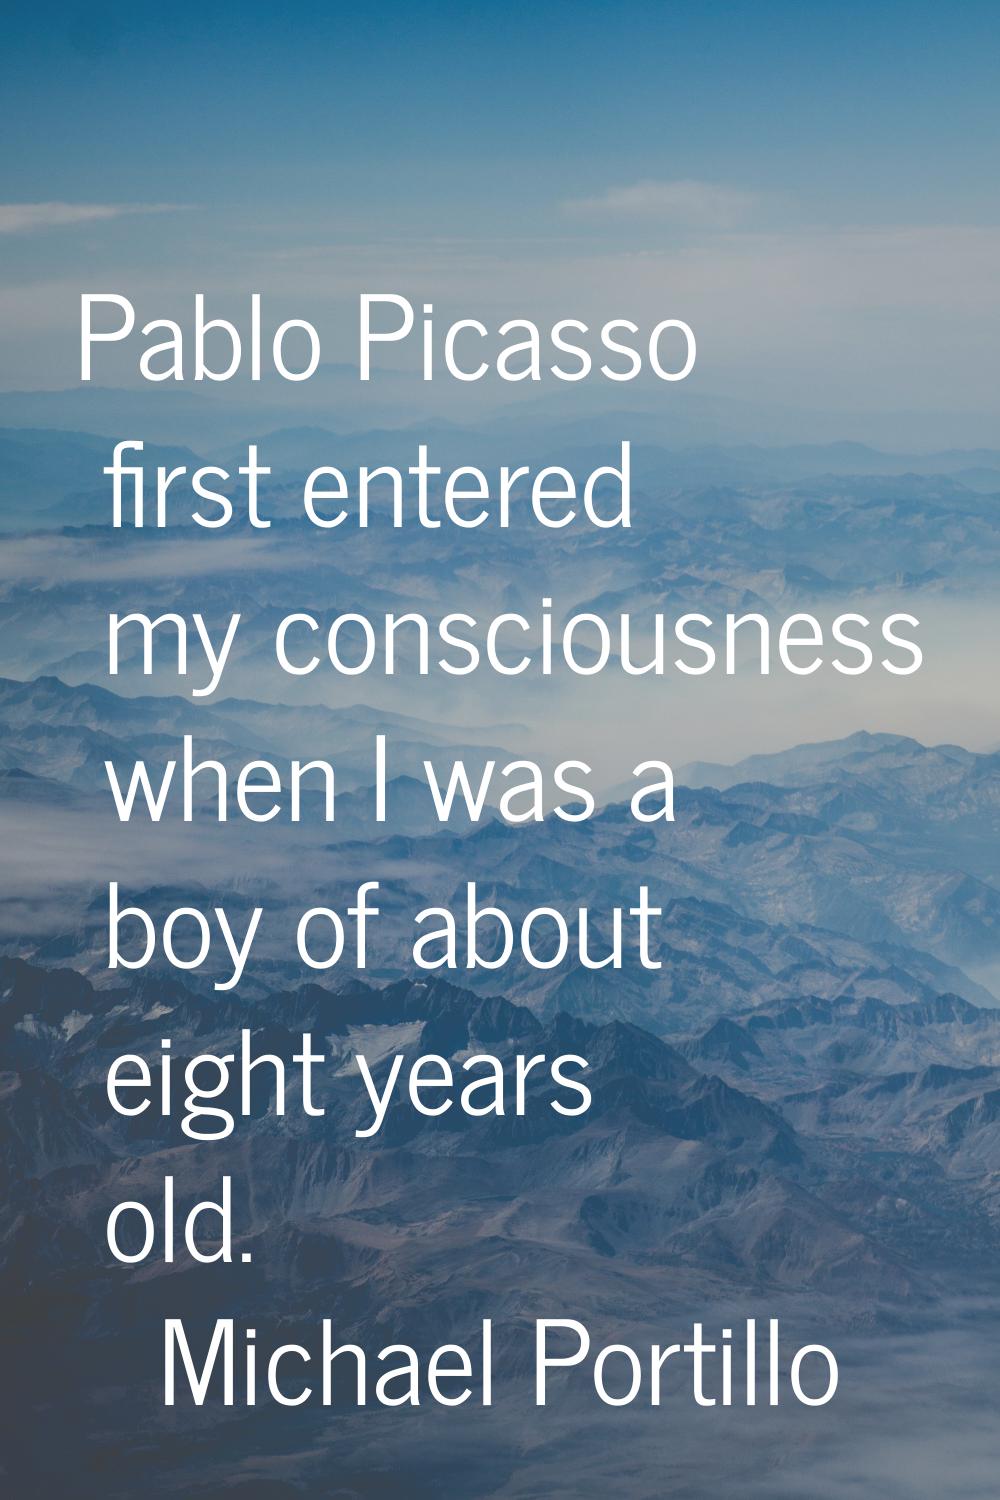 Pablo Picasso first entered my consciousness when I was a boy of about eight years old.